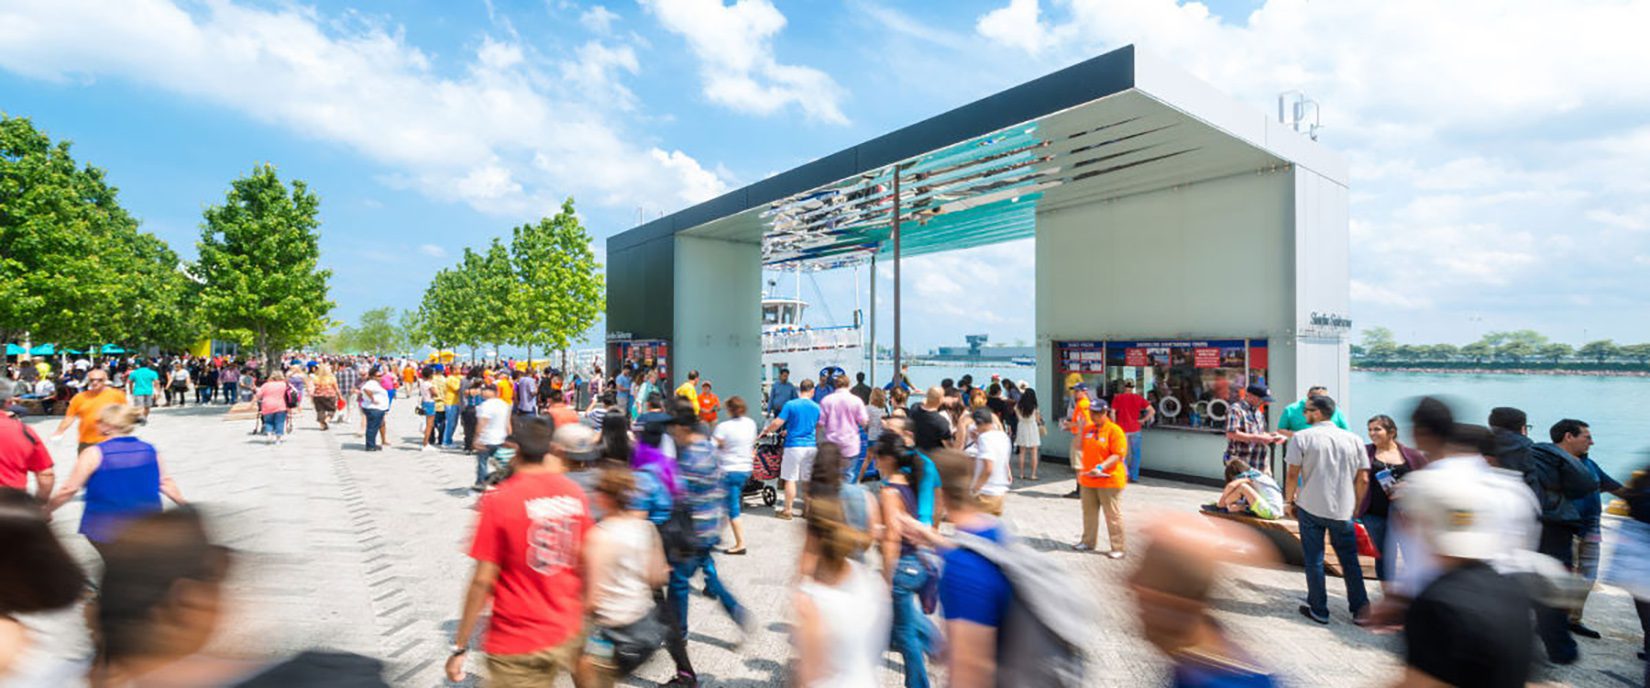 Navy Pier’s Neighborhood Artisan Market Launches Entrepreneurship and Connects Communities